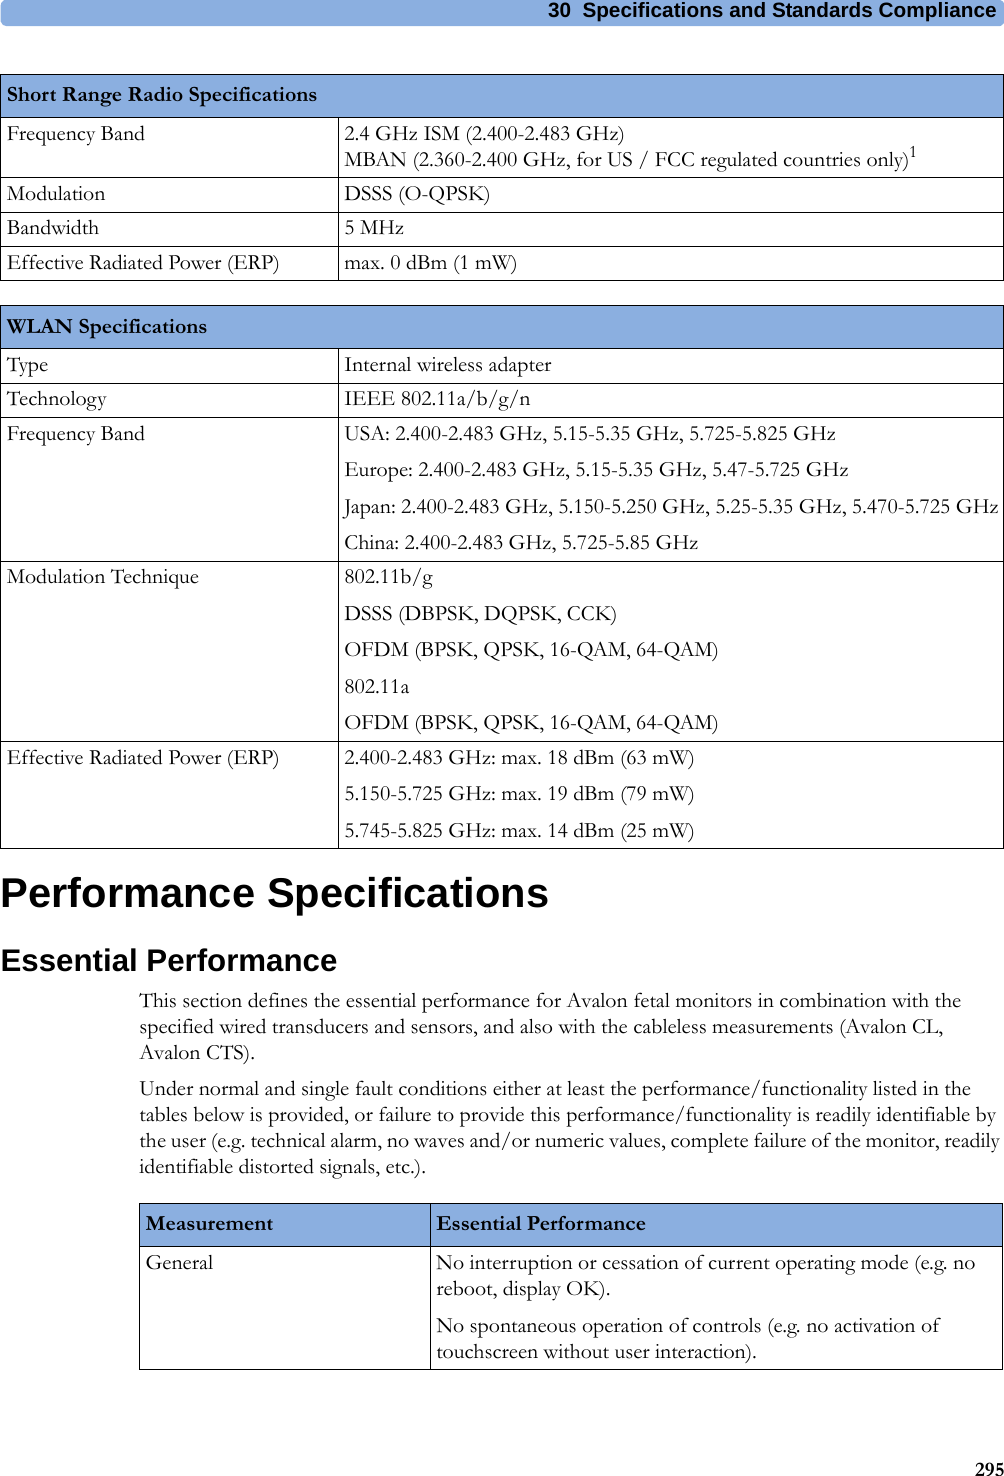 30  Specifications and Standards Compliance295Performance SpecificationsEssential PerformanceThis section defines the essential performance for Avalon fetal monitors in combination with the specified wired transducers and sensors, and also with the cableless measurements (Avalon CL, Avalon CTS).Under normal and single fault conditions either at least the performance/functionality listed in the tables below is provided, or failure to provide this performance/functionality is readily identifiable by the user (e.g. technical alarm, no waves and/or numeric values, complete failure of the monitor, readily identifiable distorted signals, etc.).Frequency Band 2.4 GHz ISM (2.400-2.483 GHz) MBAN (2.360-2.400 GHz, for US / FCC regulated countries only)1Modulation DSSS (O-QPSK)Bandwidth 5 MHzEffective Radiated Power (ERP) max. 0 dBm (1 mW)Short Range Radio SpecificationsWLAN SpecificationsType Internal wireless adapterTechnology IEEE 802.11a/b/g/nFrequency Band USA: 2.400-2.483 GHz, 5.15-5.35 GHz, 5.725-5.825 GHzEurope: 2.400-2.483 GHz, 5.15-5.35 GHz, 5.47-5.725 GHzJapan: 2.400-2.483 GHz, 5.150-5.250 GHz, 5.25-5.35 GHz, 5.470-5.725 GHzChina: 2.400-2.483 GHz, 5.725-5.85 GHzModulation Technique 802.11b/gDSSS (DBPSK, DQPSK, CCK)OFDM (BPSK, QPSK, 16-QAM, 64-QAM)802.11aOFDM (BPSK, QPSK, 16-QAM, 64-QAM)Effective Radiated Power (ERP) 2.400-2.483 GHz: max. 18 dBm (63 mW)5.150-5.725 GHz: max. 19 dBm (79 mW)5.745-5.825 GHz: max. 14 dBm (25 mW)Measurement Essential PerformanceGeneral No interruption or cessation of current operating mode (e.g. no reboot, display OK).No spontaneous operation of controls (e.g. no activation of touchscreen without user interaction).